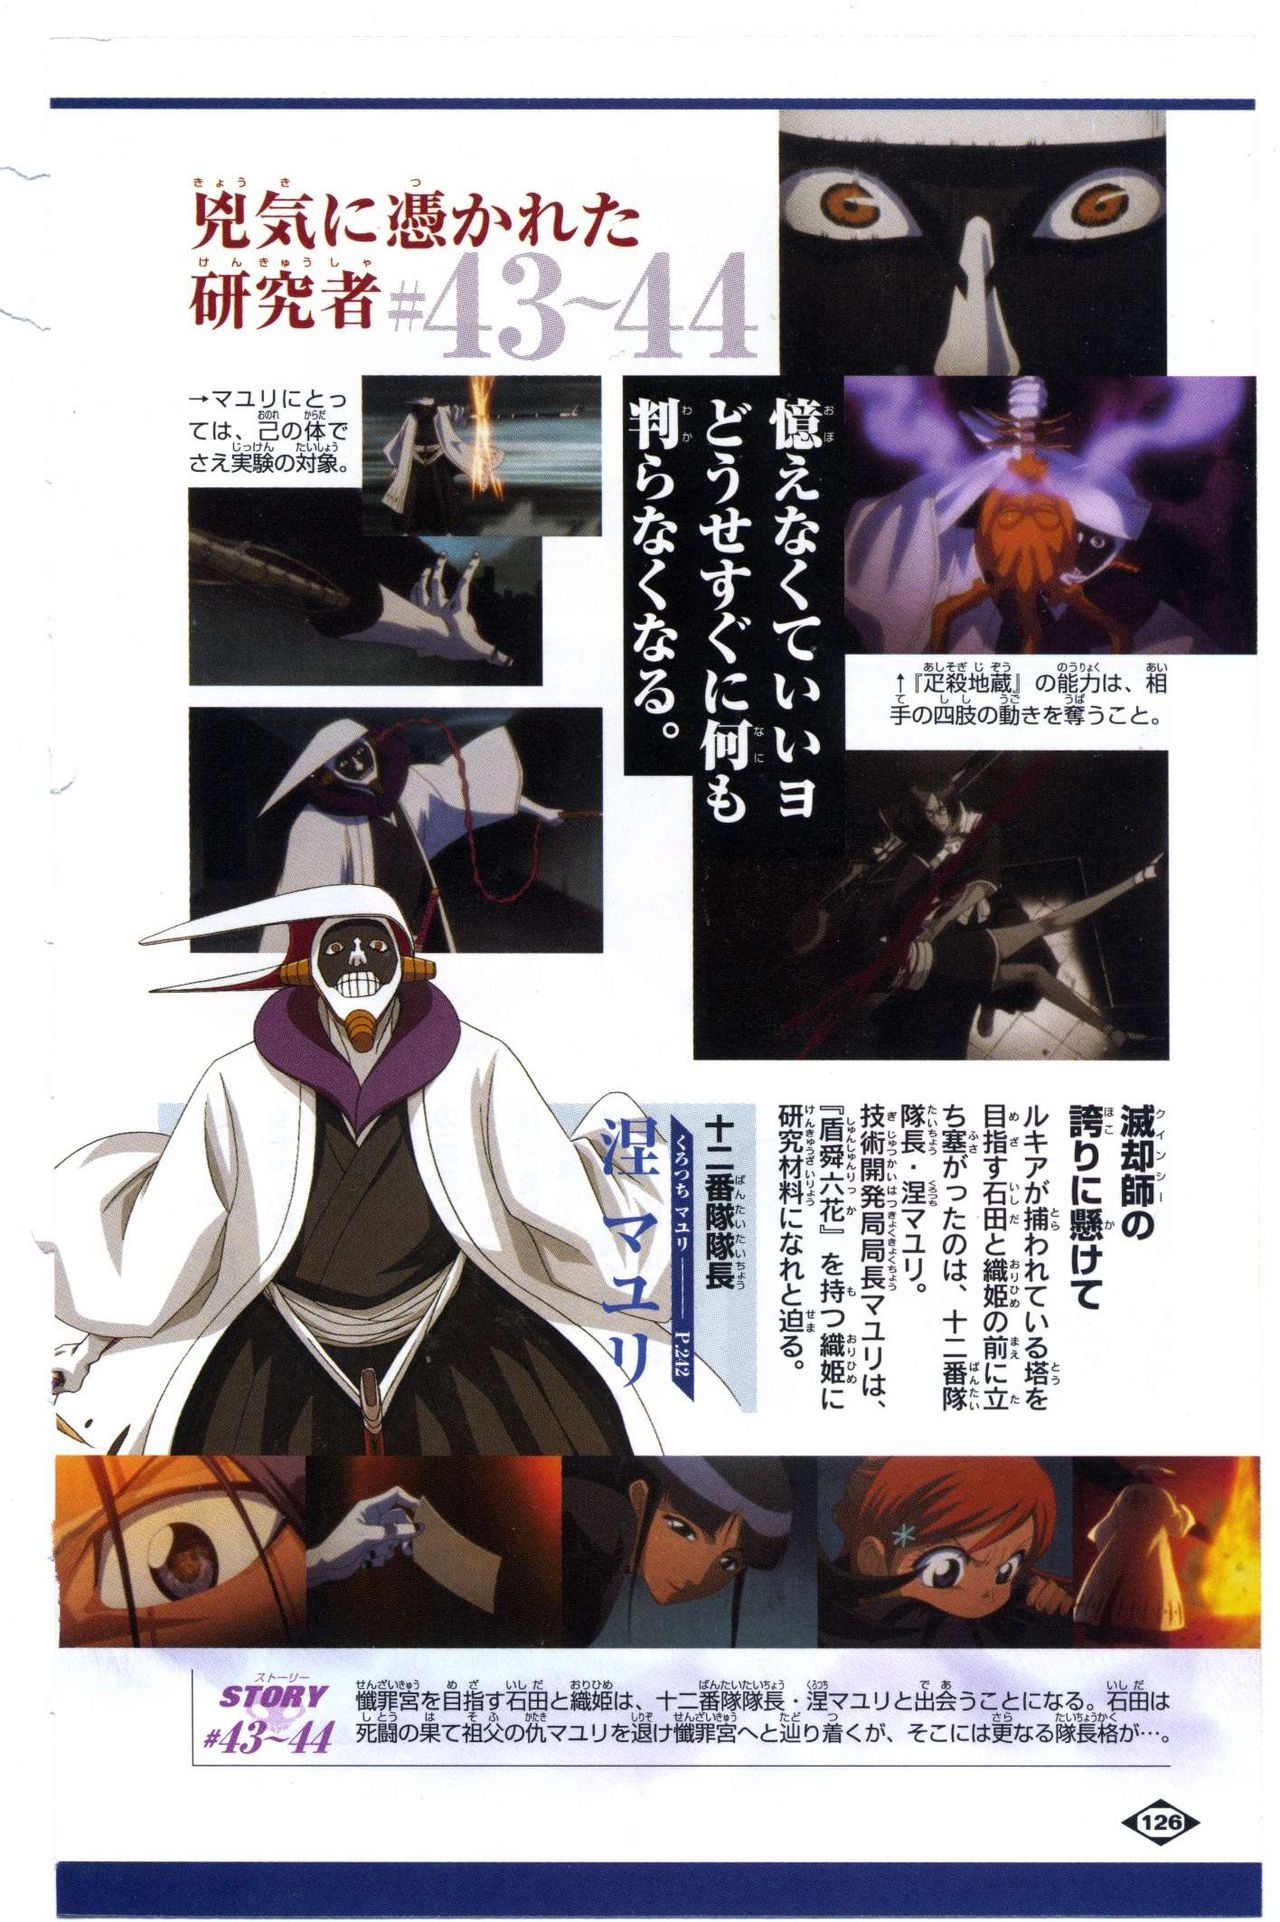 Bleach: Official Animation Book VIBEs 126